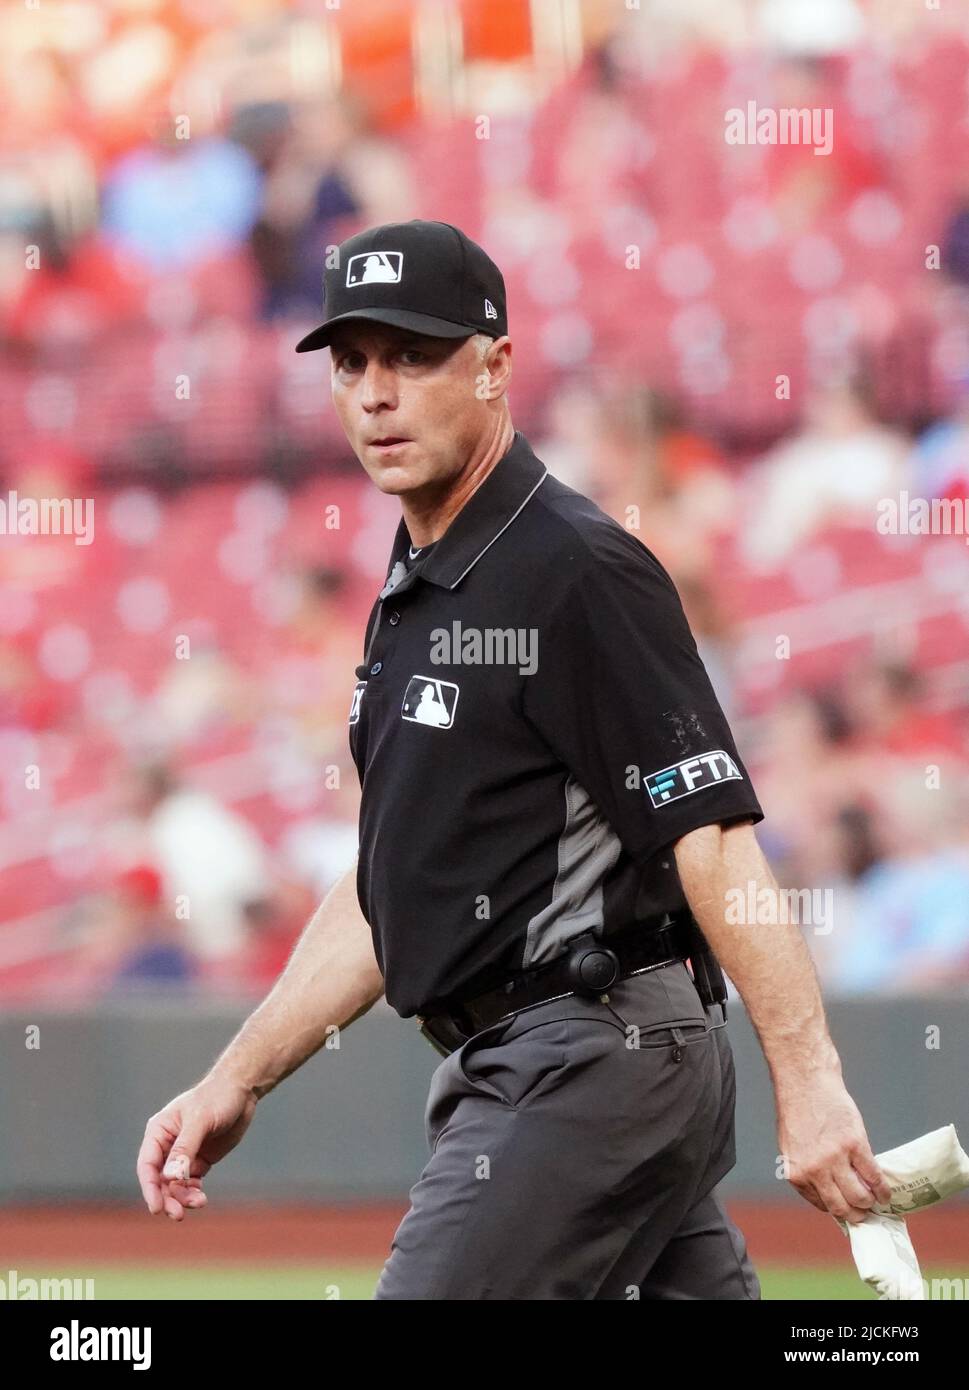 St. Louis, United States. 14th June, 2022. Third base umpire Dan Iassogna brings out a new rozin bag for the pitching mound during the Pittsburgh Pirates-St. Louis Cardinals baseball game at Busch Stadium in St. Louis on Monday, June 13, 2022. Photo by Bill Greenblatt/UPI Credit: UPI/Alamy Live News Stock Photo